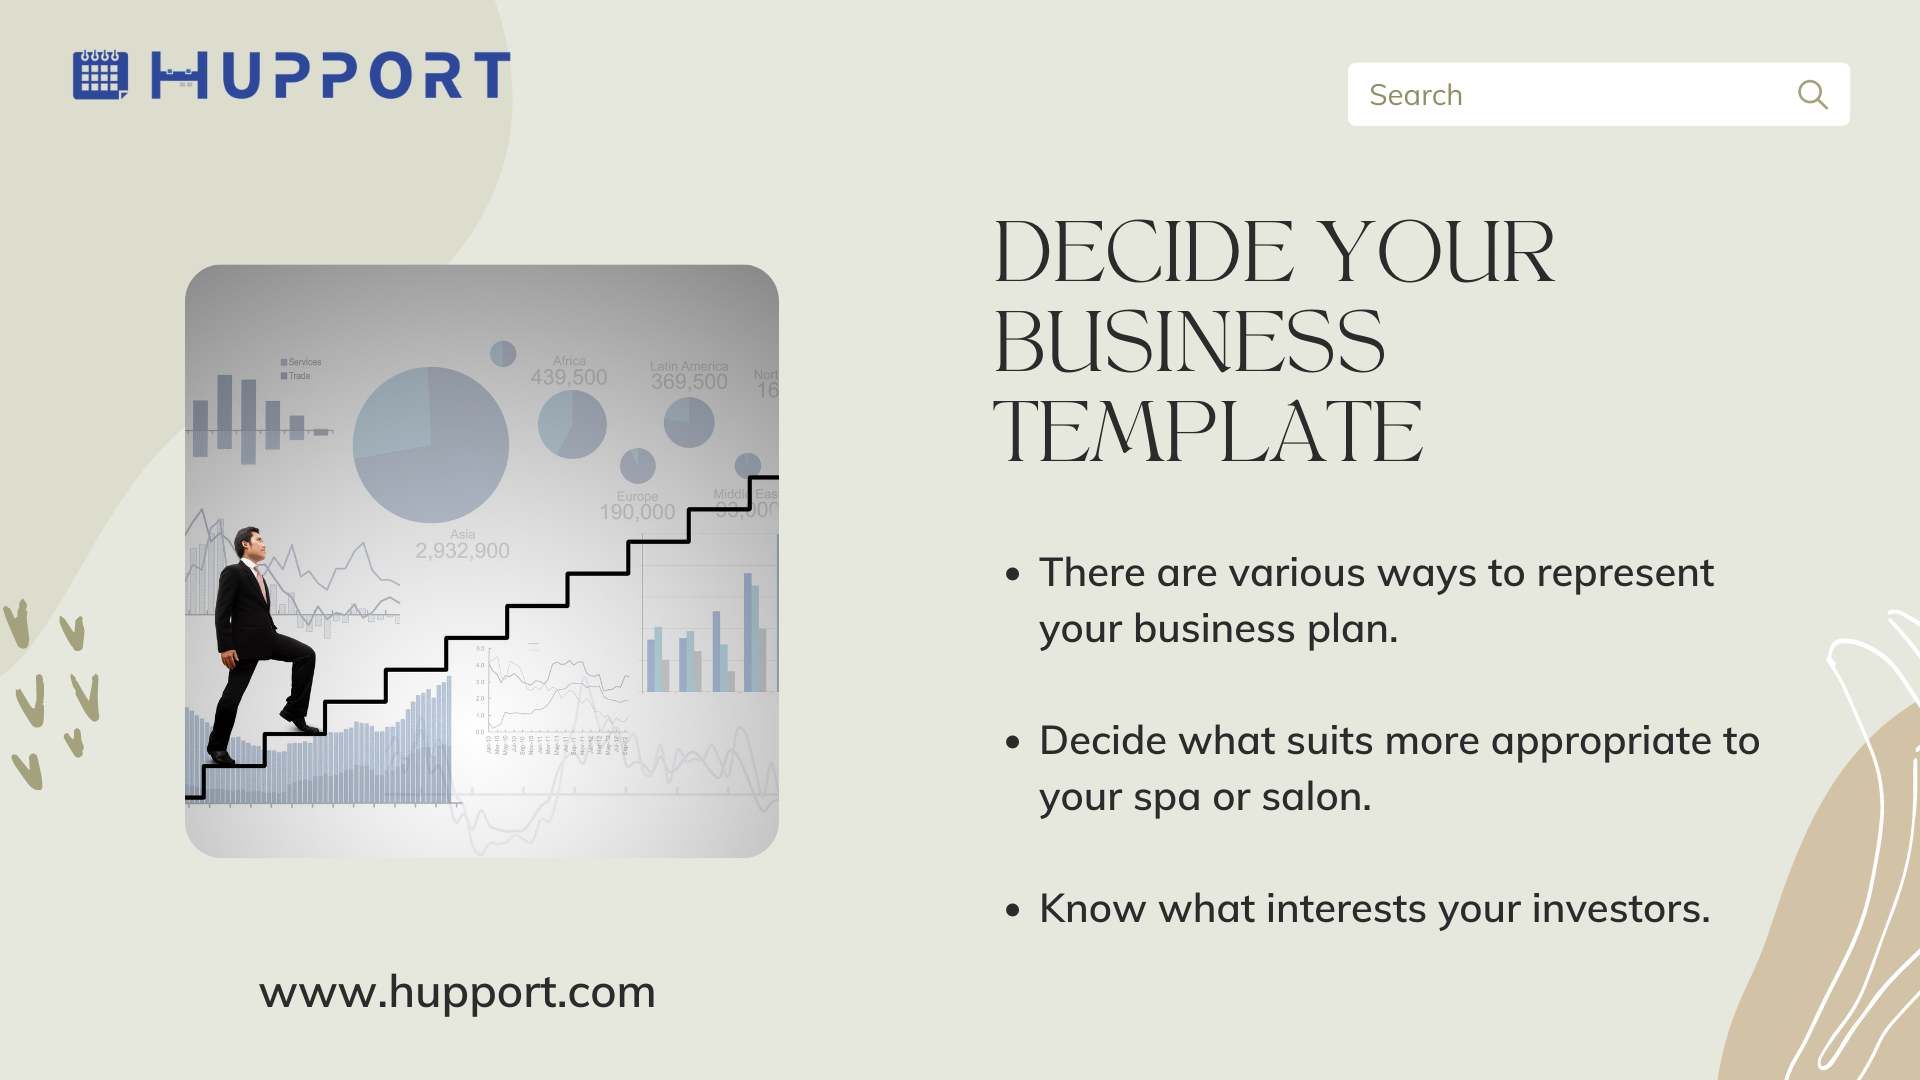 Decide your business template